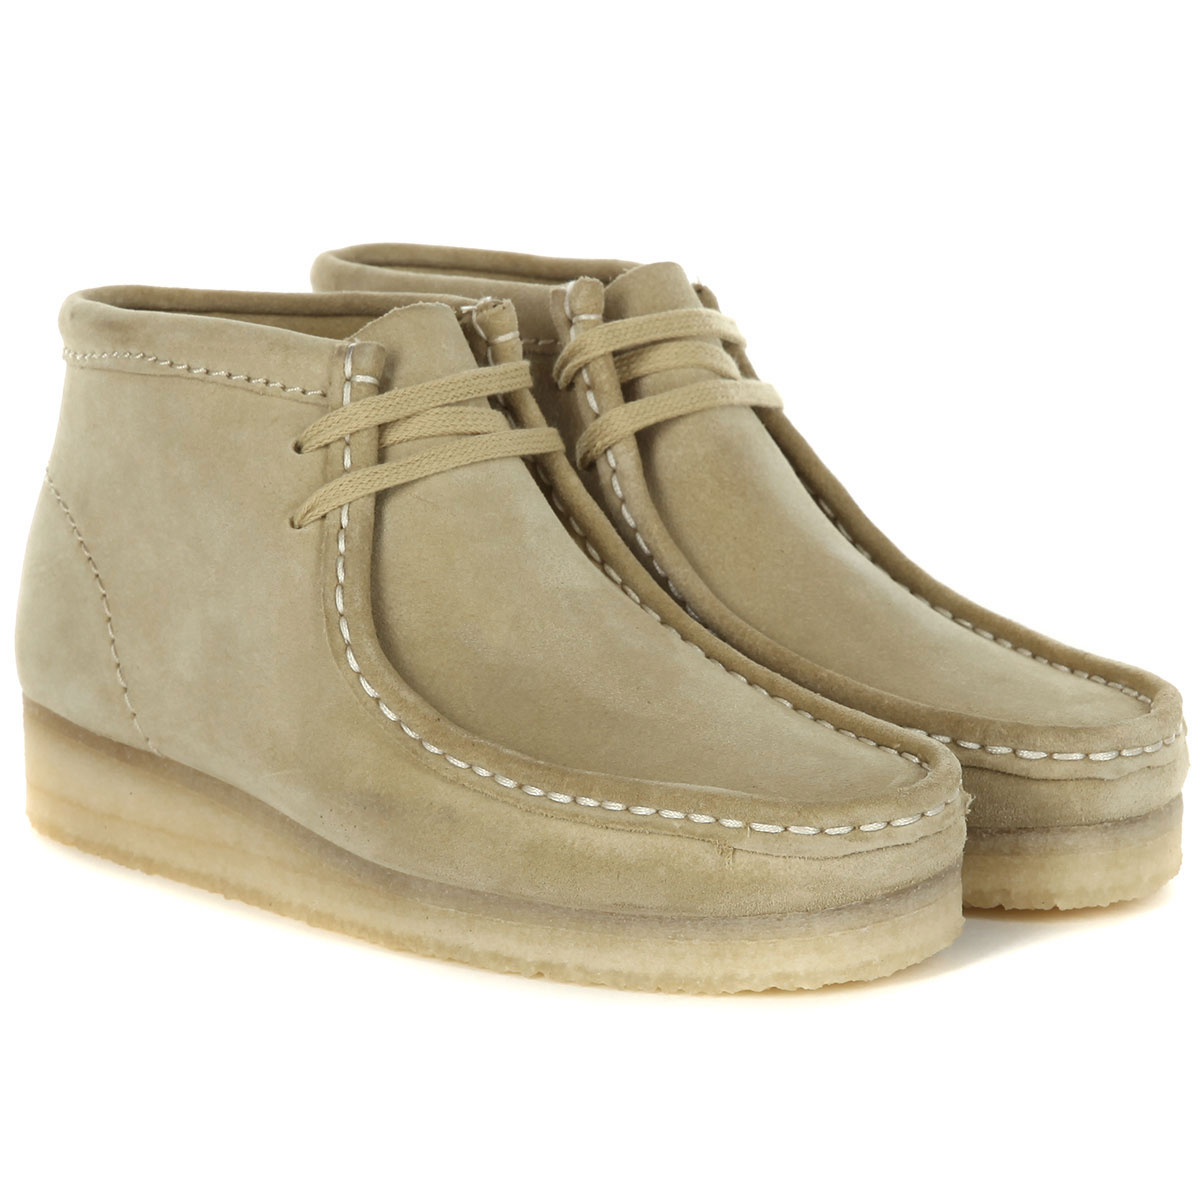 clarks wallabees where to buy